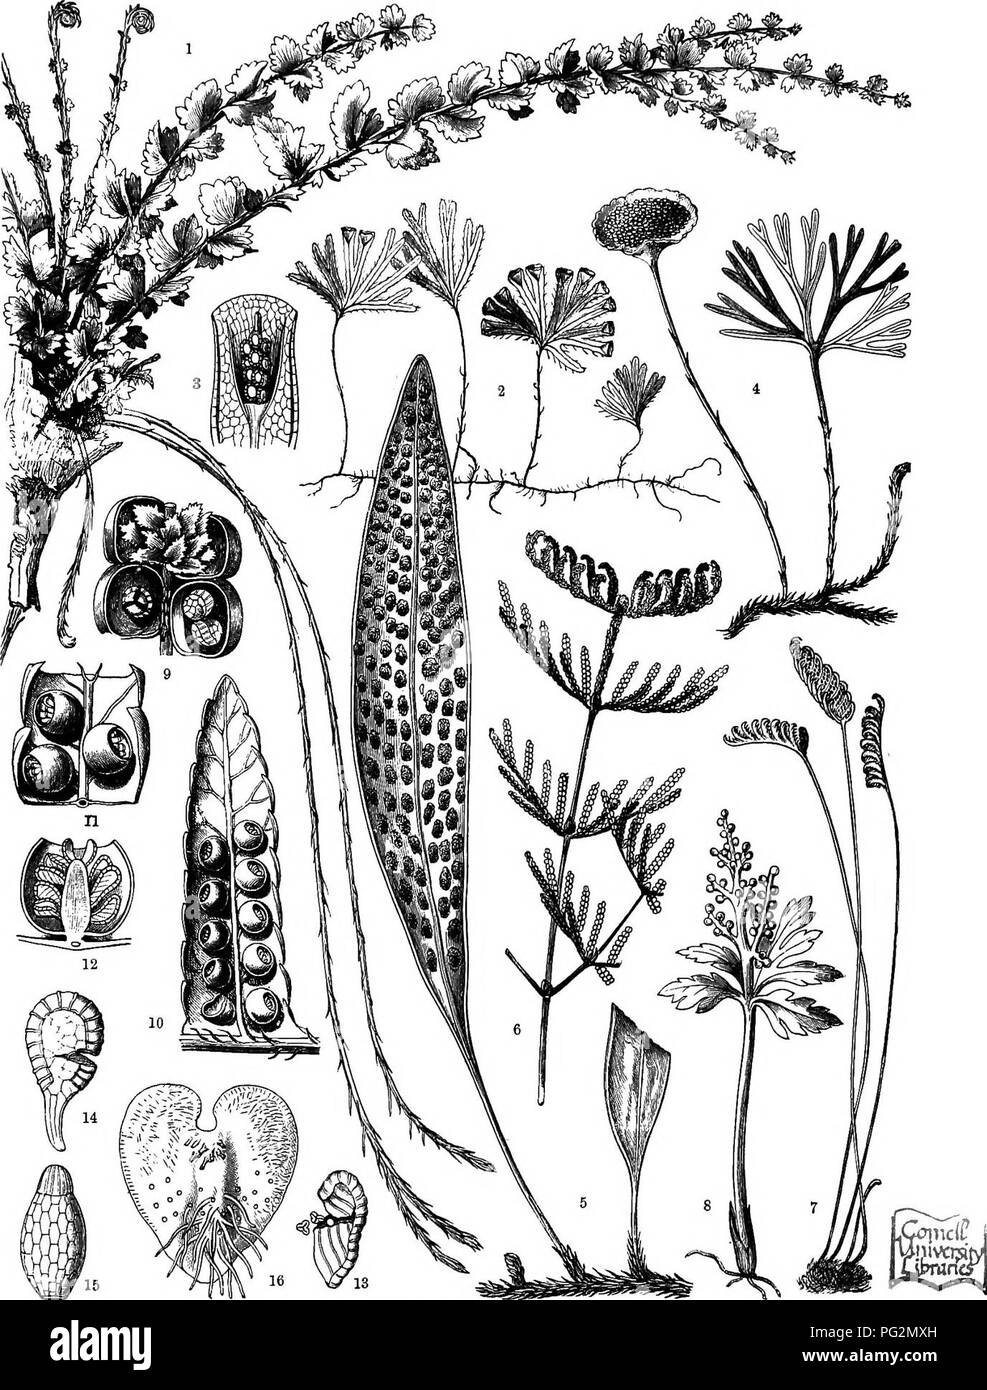 . The natural history of plants, their forms, growth, reproduction, and distribution;. Botany. PTERIDOPHYTA. 707. Fig. 400.—Various Ferns. 1 Nephrolepis Duffl. 2 Tnehomanes LyallU. * Sorus of the same fern, with cup-ahaped investment seen in longitudinal section. * Shipidopteris peltata. ^ Polypodiwm serpens. ' VoTtlou ot ironi ot Oleichenia alpina. i Schizosajlstnlosa. 8 BotryahiUTn lanceolatwm. 9 Under side of a fragment of the frond of Gleichenia alpina; above the sporangia are concealed by a tuft of scales, below they are exposed, i&quot; and &quot; Fertile pinnule of Cyathea elegam. 12 Lo Stock Photo